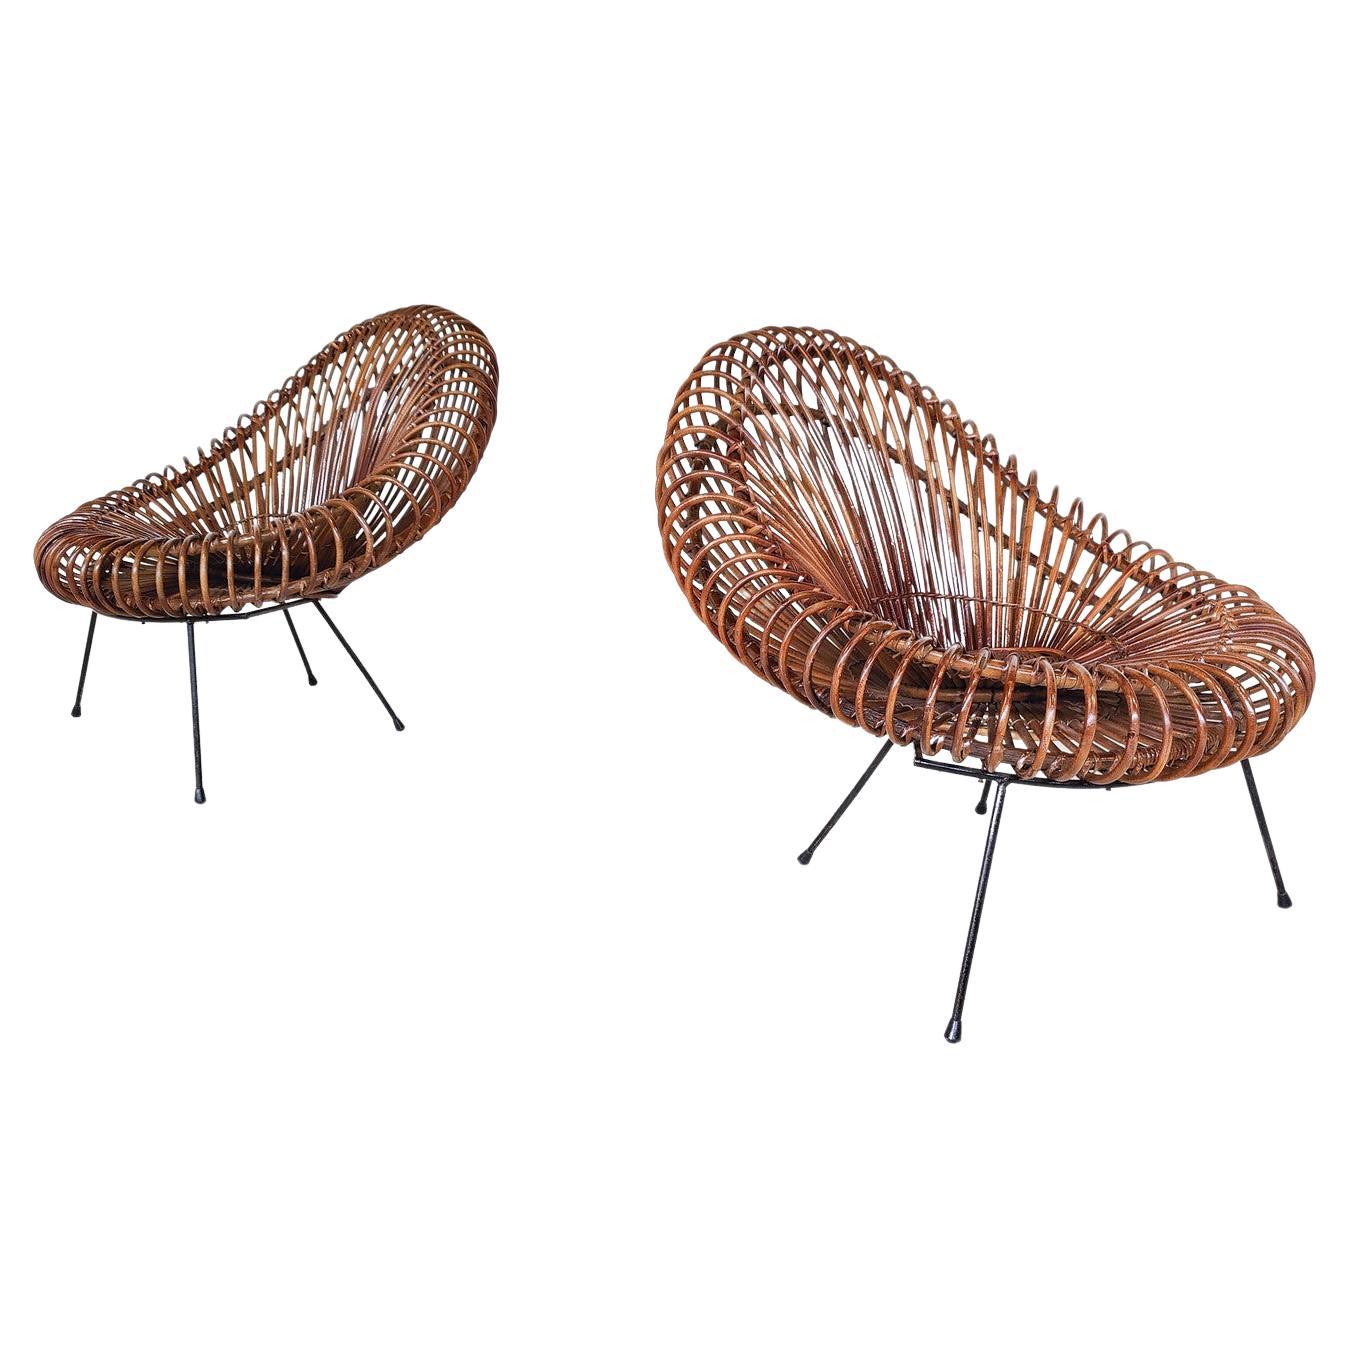 Mid-Century Modern Pair of Chairs by Janine Abraham & Dirk Jan Rol for Rougier  For Sale